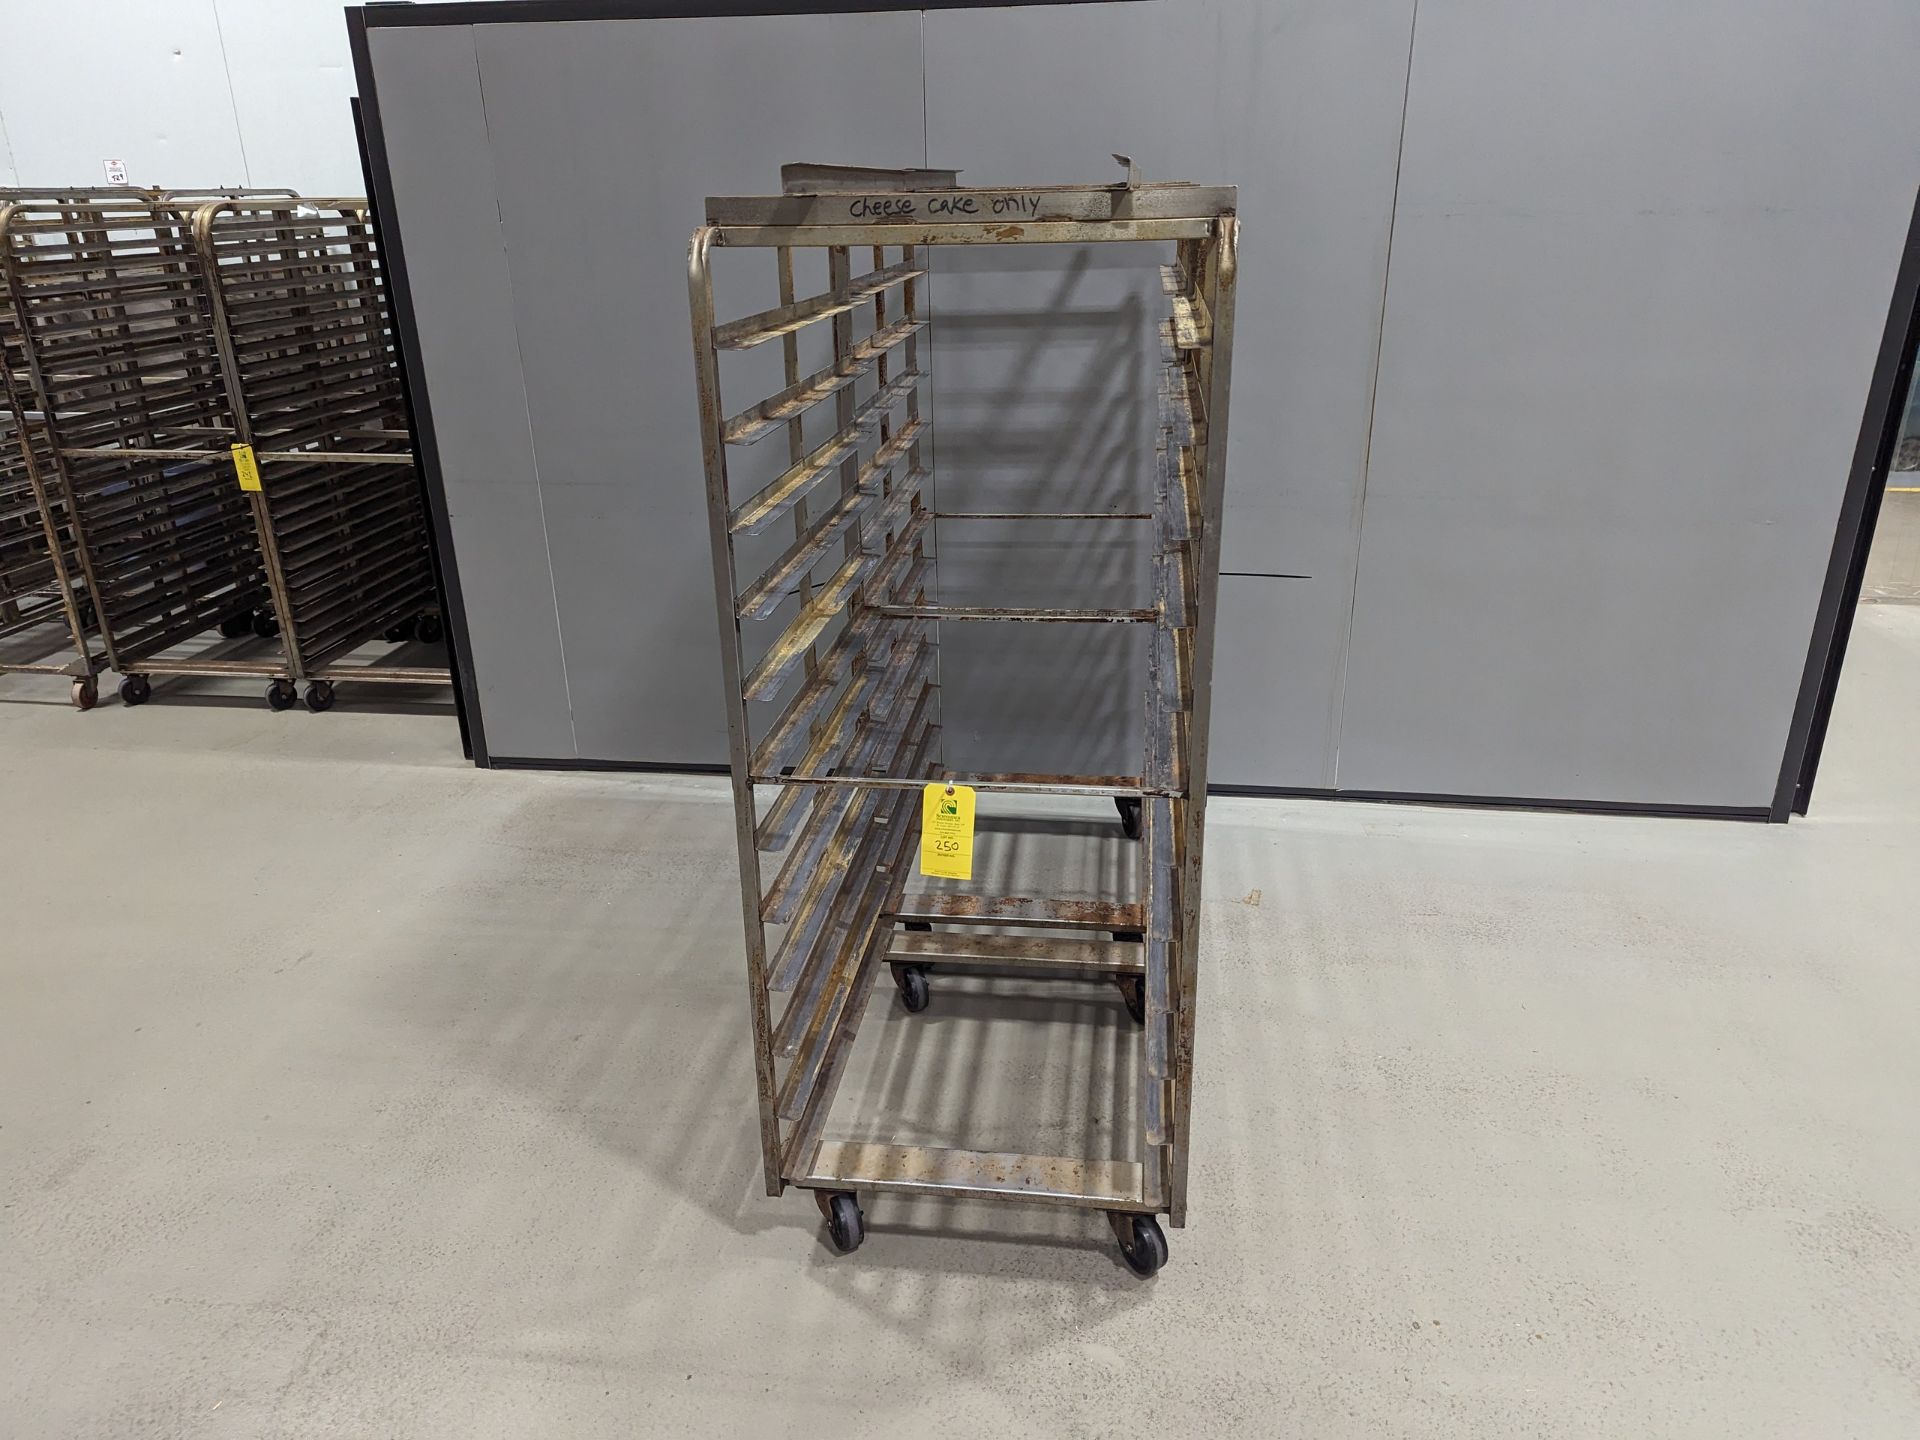 Lot of 2 Double Wide Stainless Steel Bakery Racks, Dimensions LxWxH: 72x28x69 Measurements are for